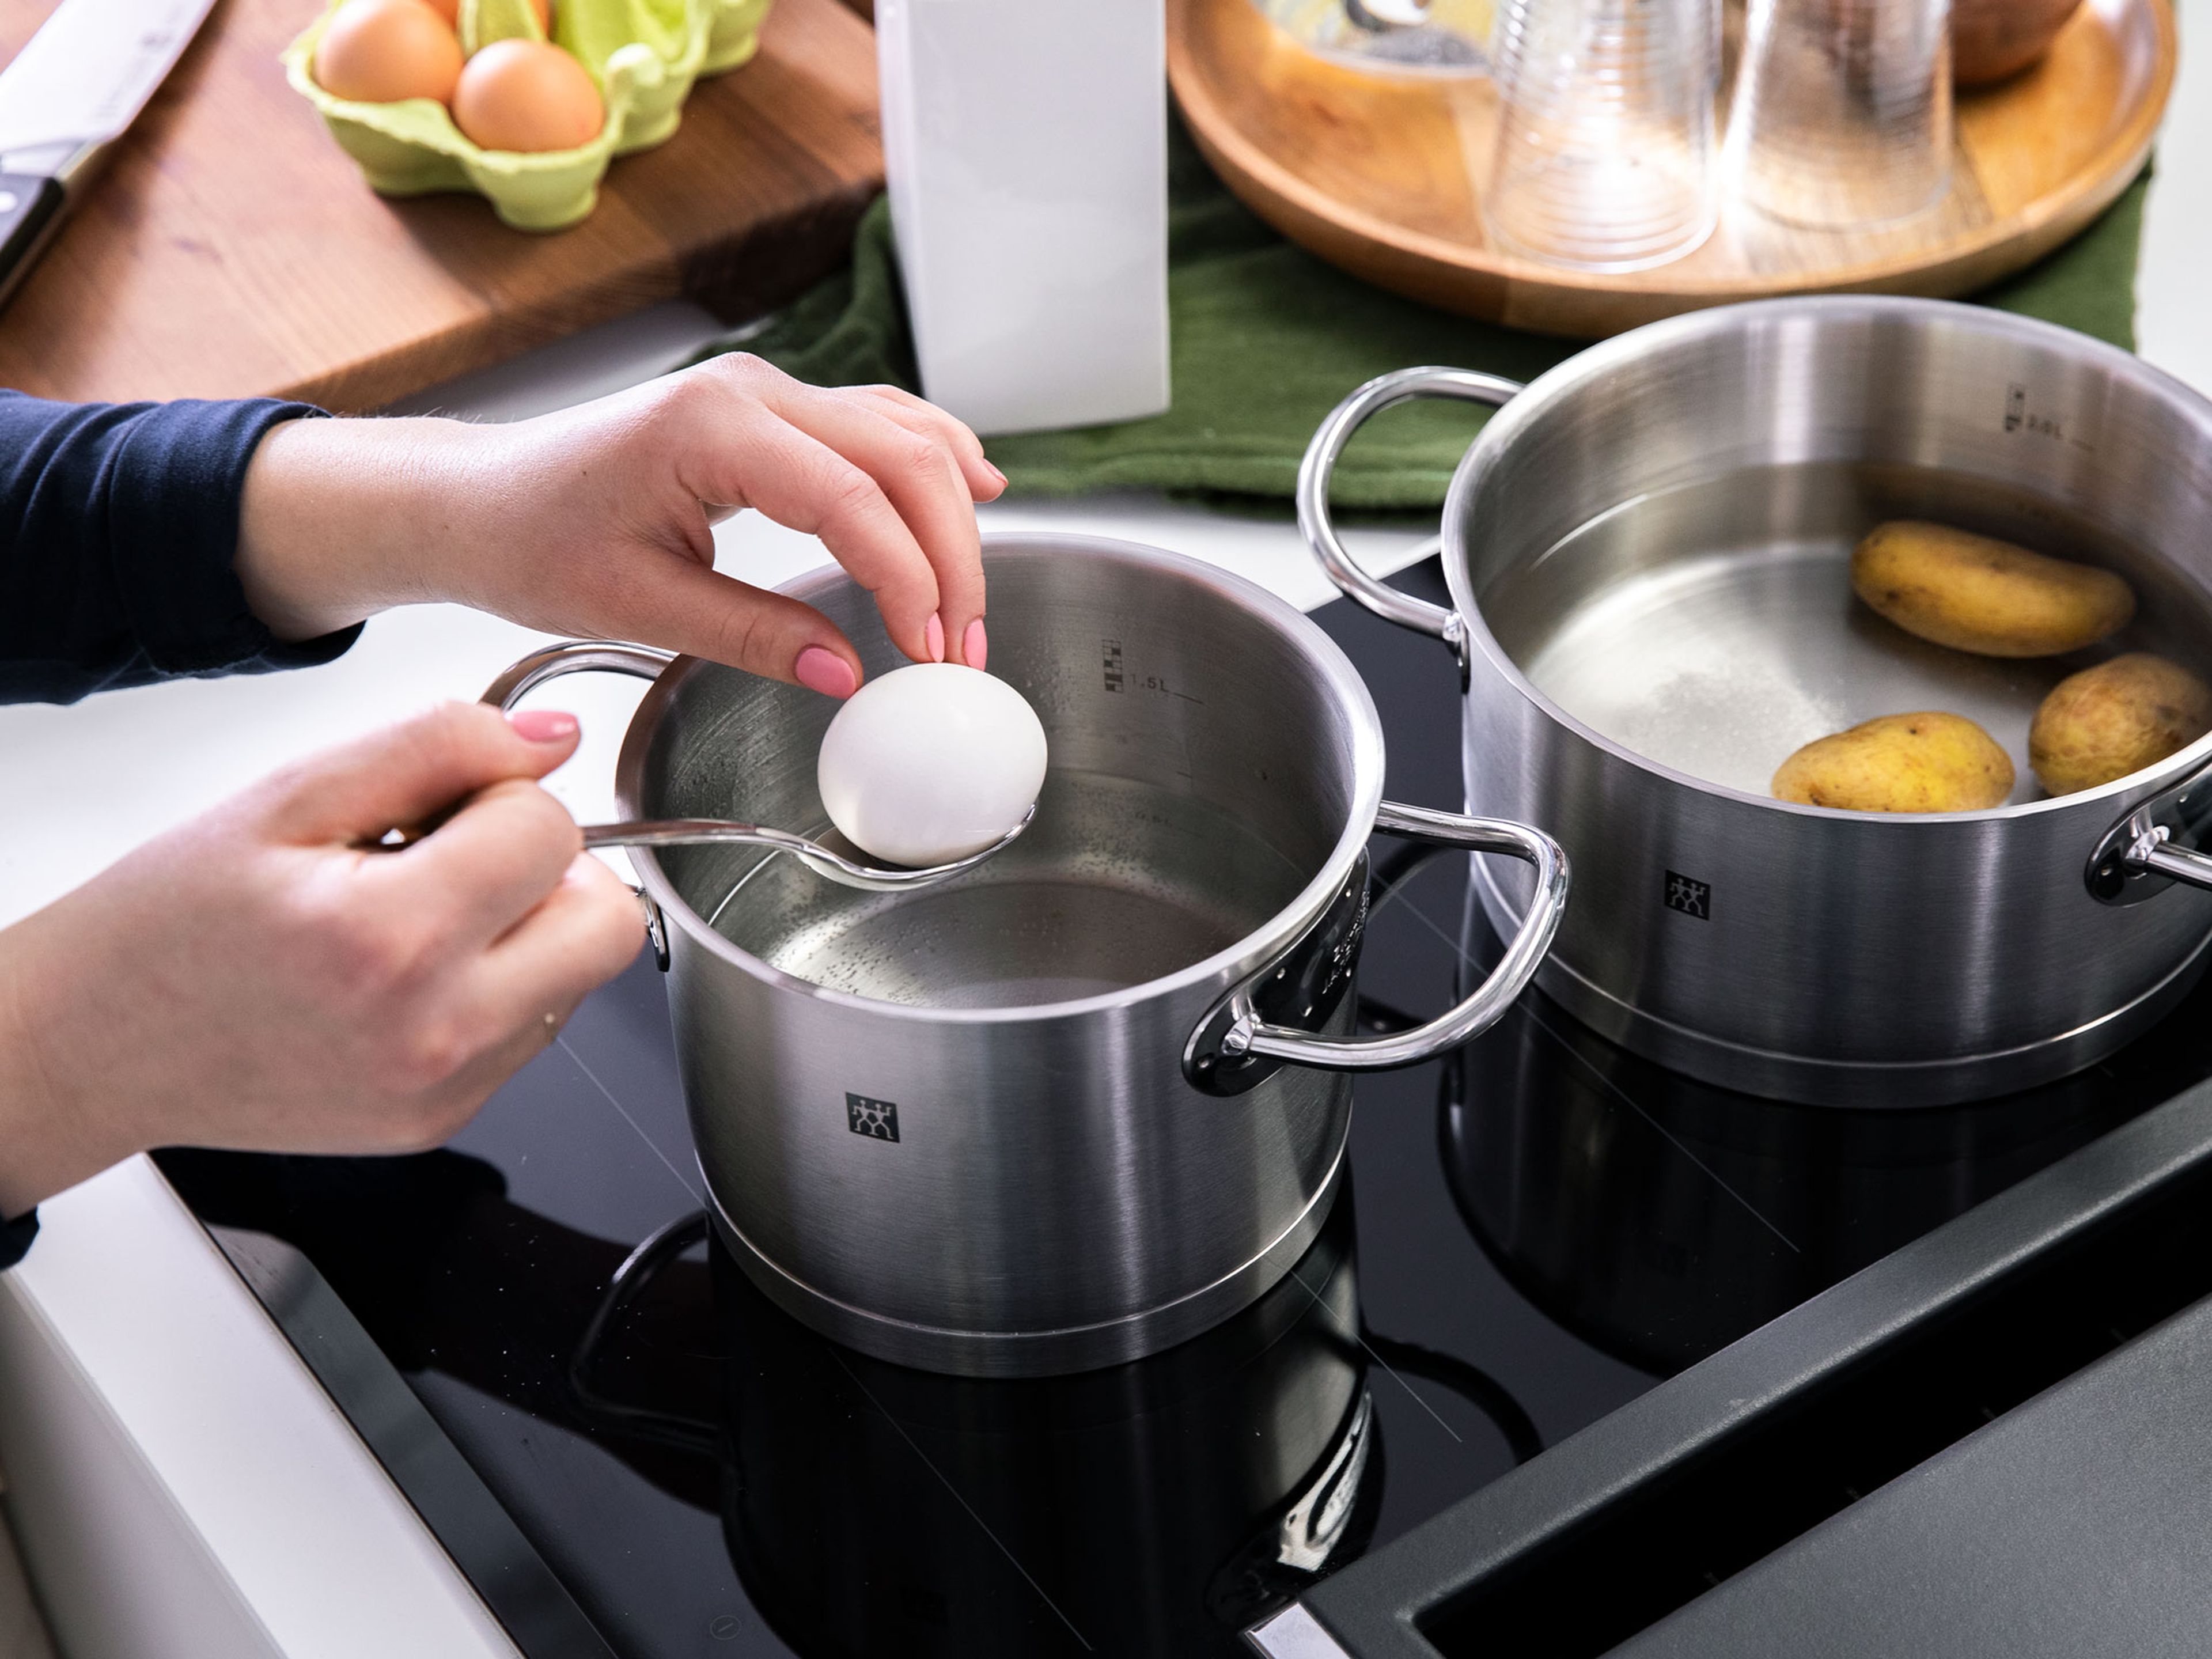 Add potatoes to a pot with cold water. Season with salt, bring to a boil, and boil until tender. In the meantime, boil eggs in a separate pot of water for approx. 6 – 7 min. Drain potatoes and eggs and let cool. Peel and chop into bite-sized pieces.